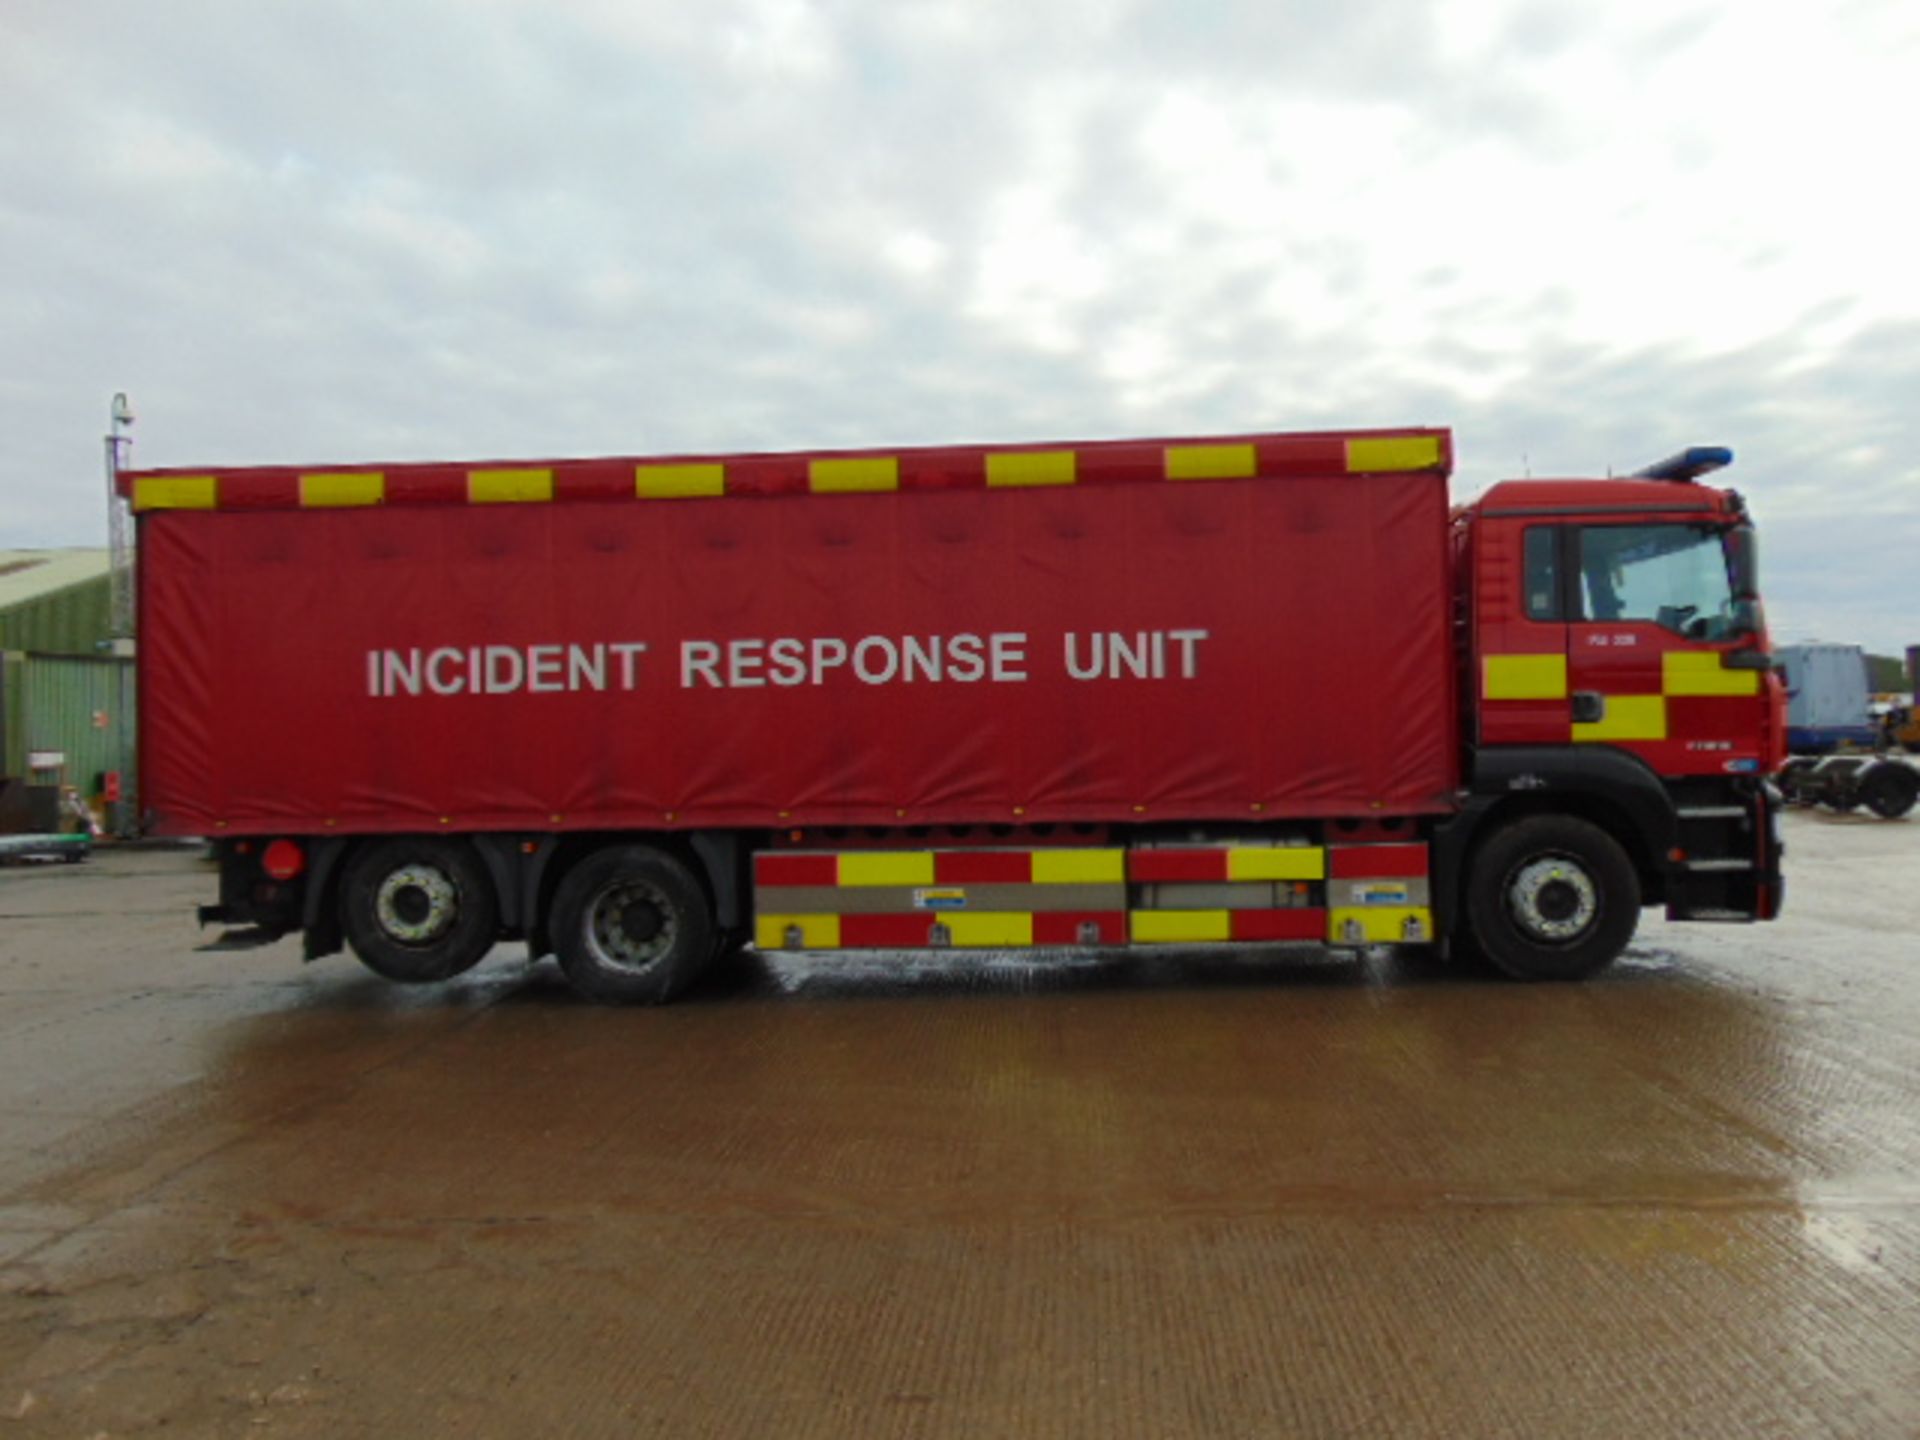 2004 MAN TG-A 6x2 Incident Support Unit - Image 5 of 26